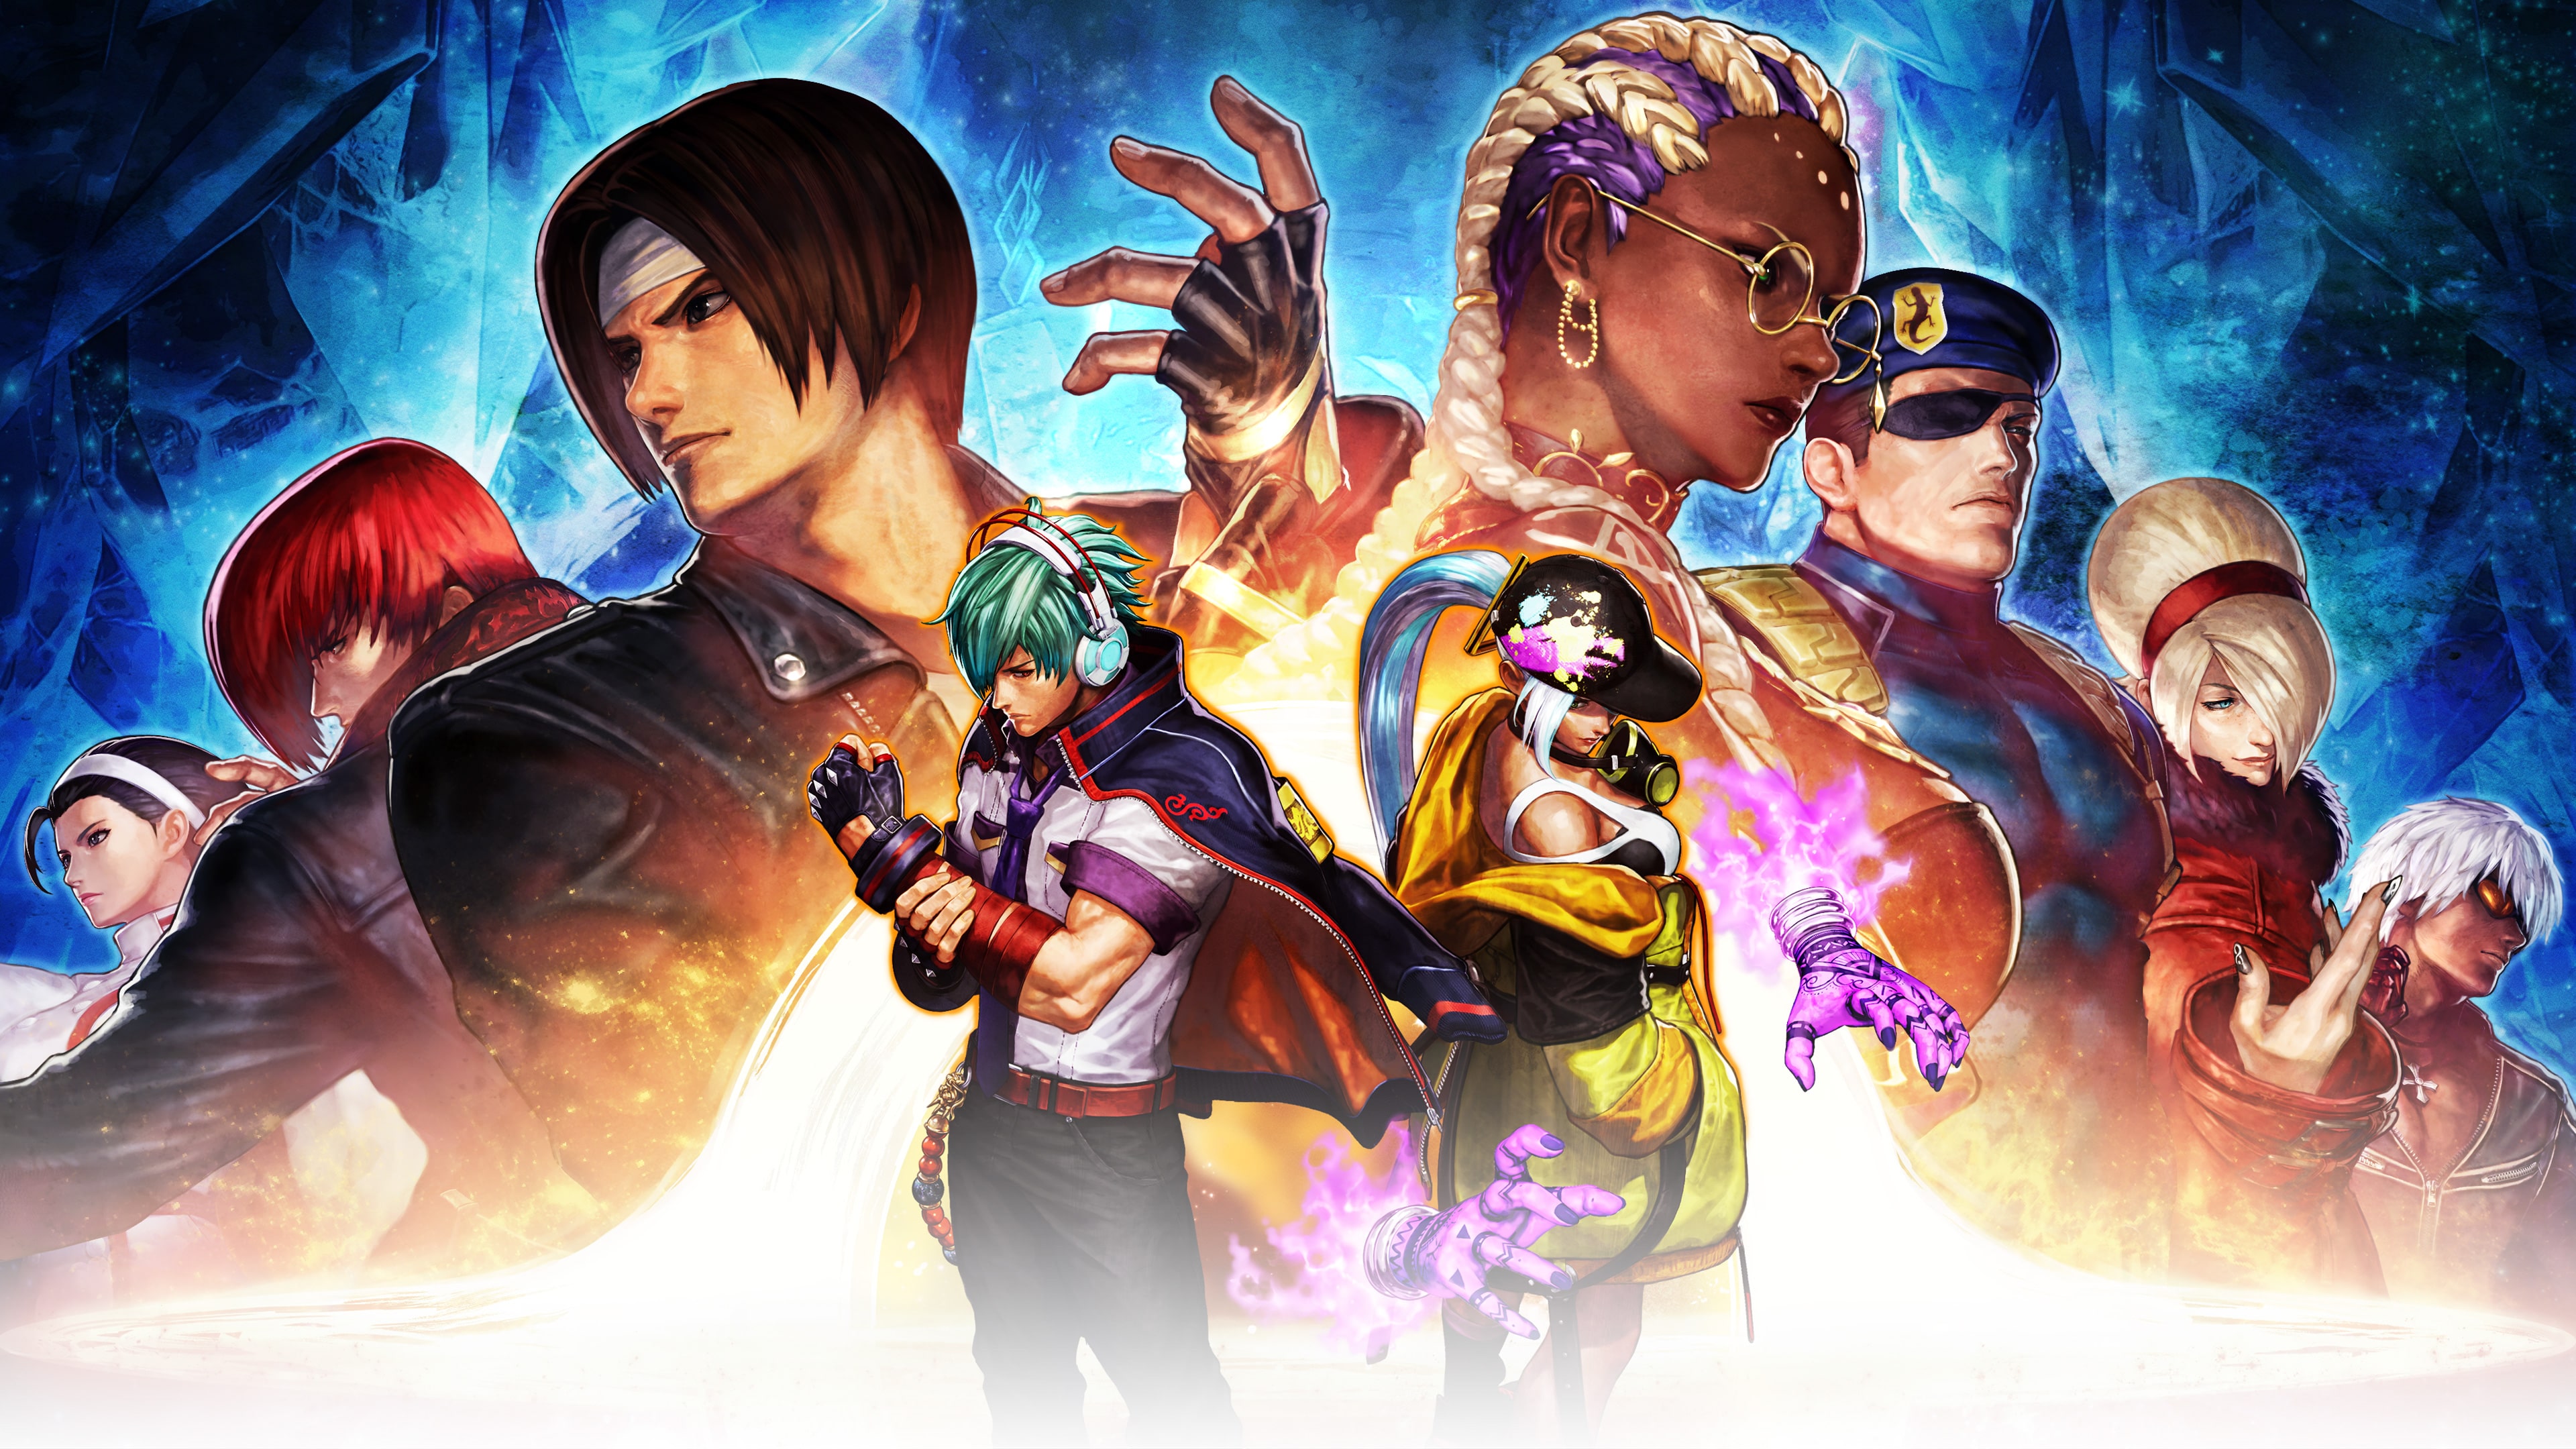 THE KING OF FIGHTERS XV 体験版